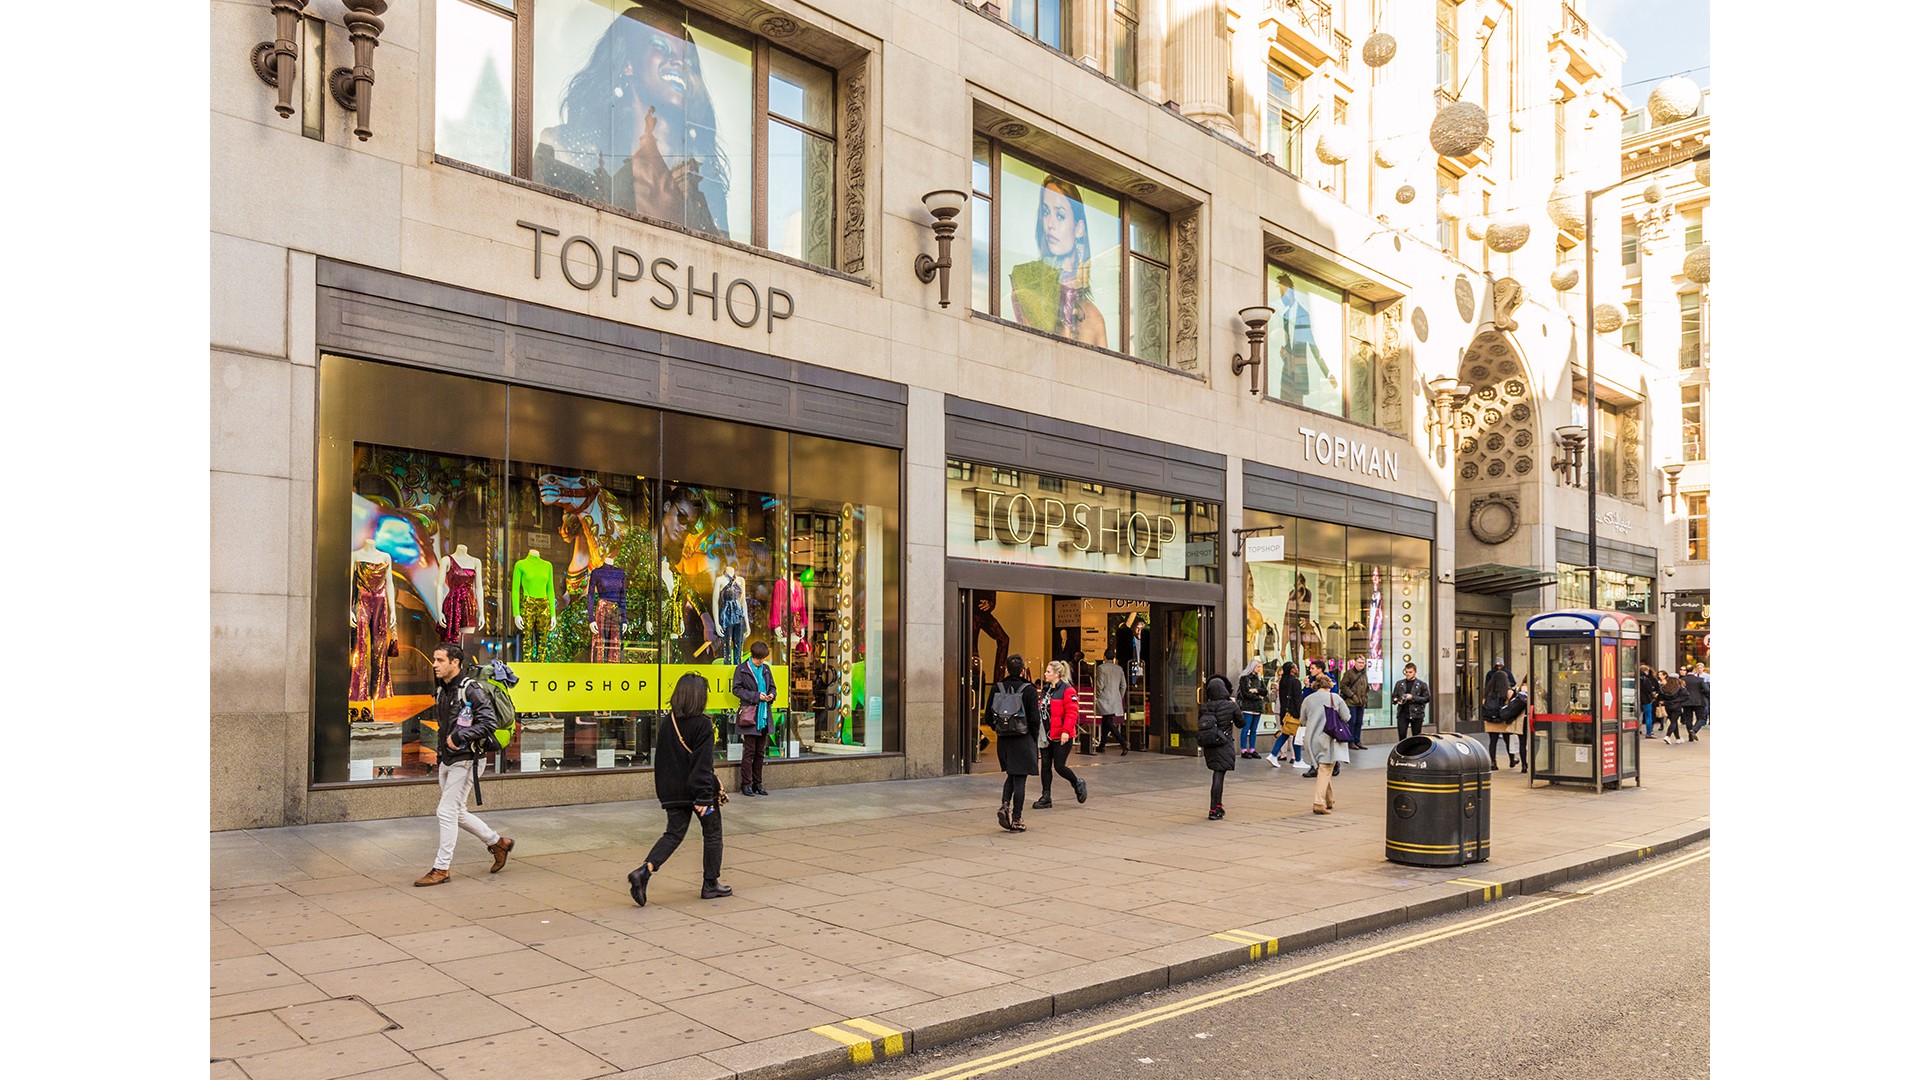 A view of the outside of Topshop on Oxford Street with people walking past.